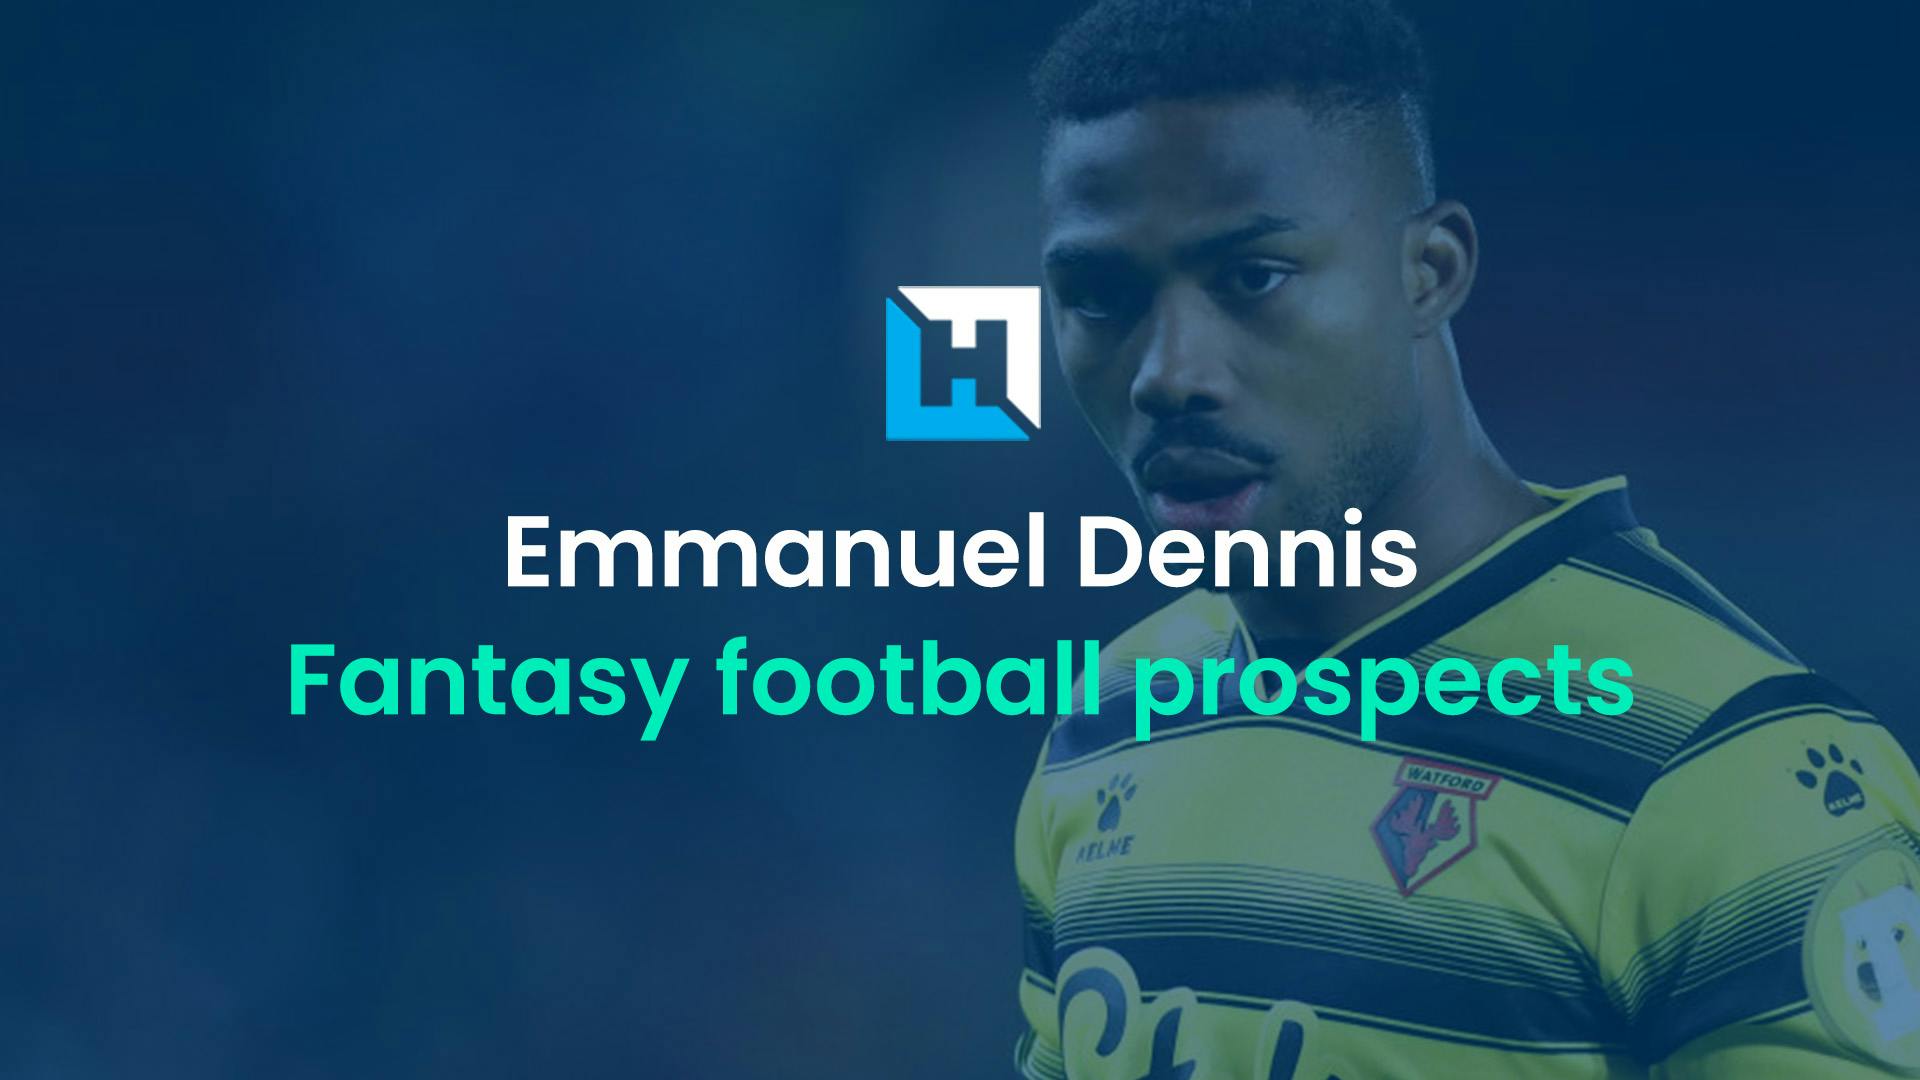 Emmanuel Dennis – FPL, Sky, TFF and Dream Team prospects as a Nottingham Forest player